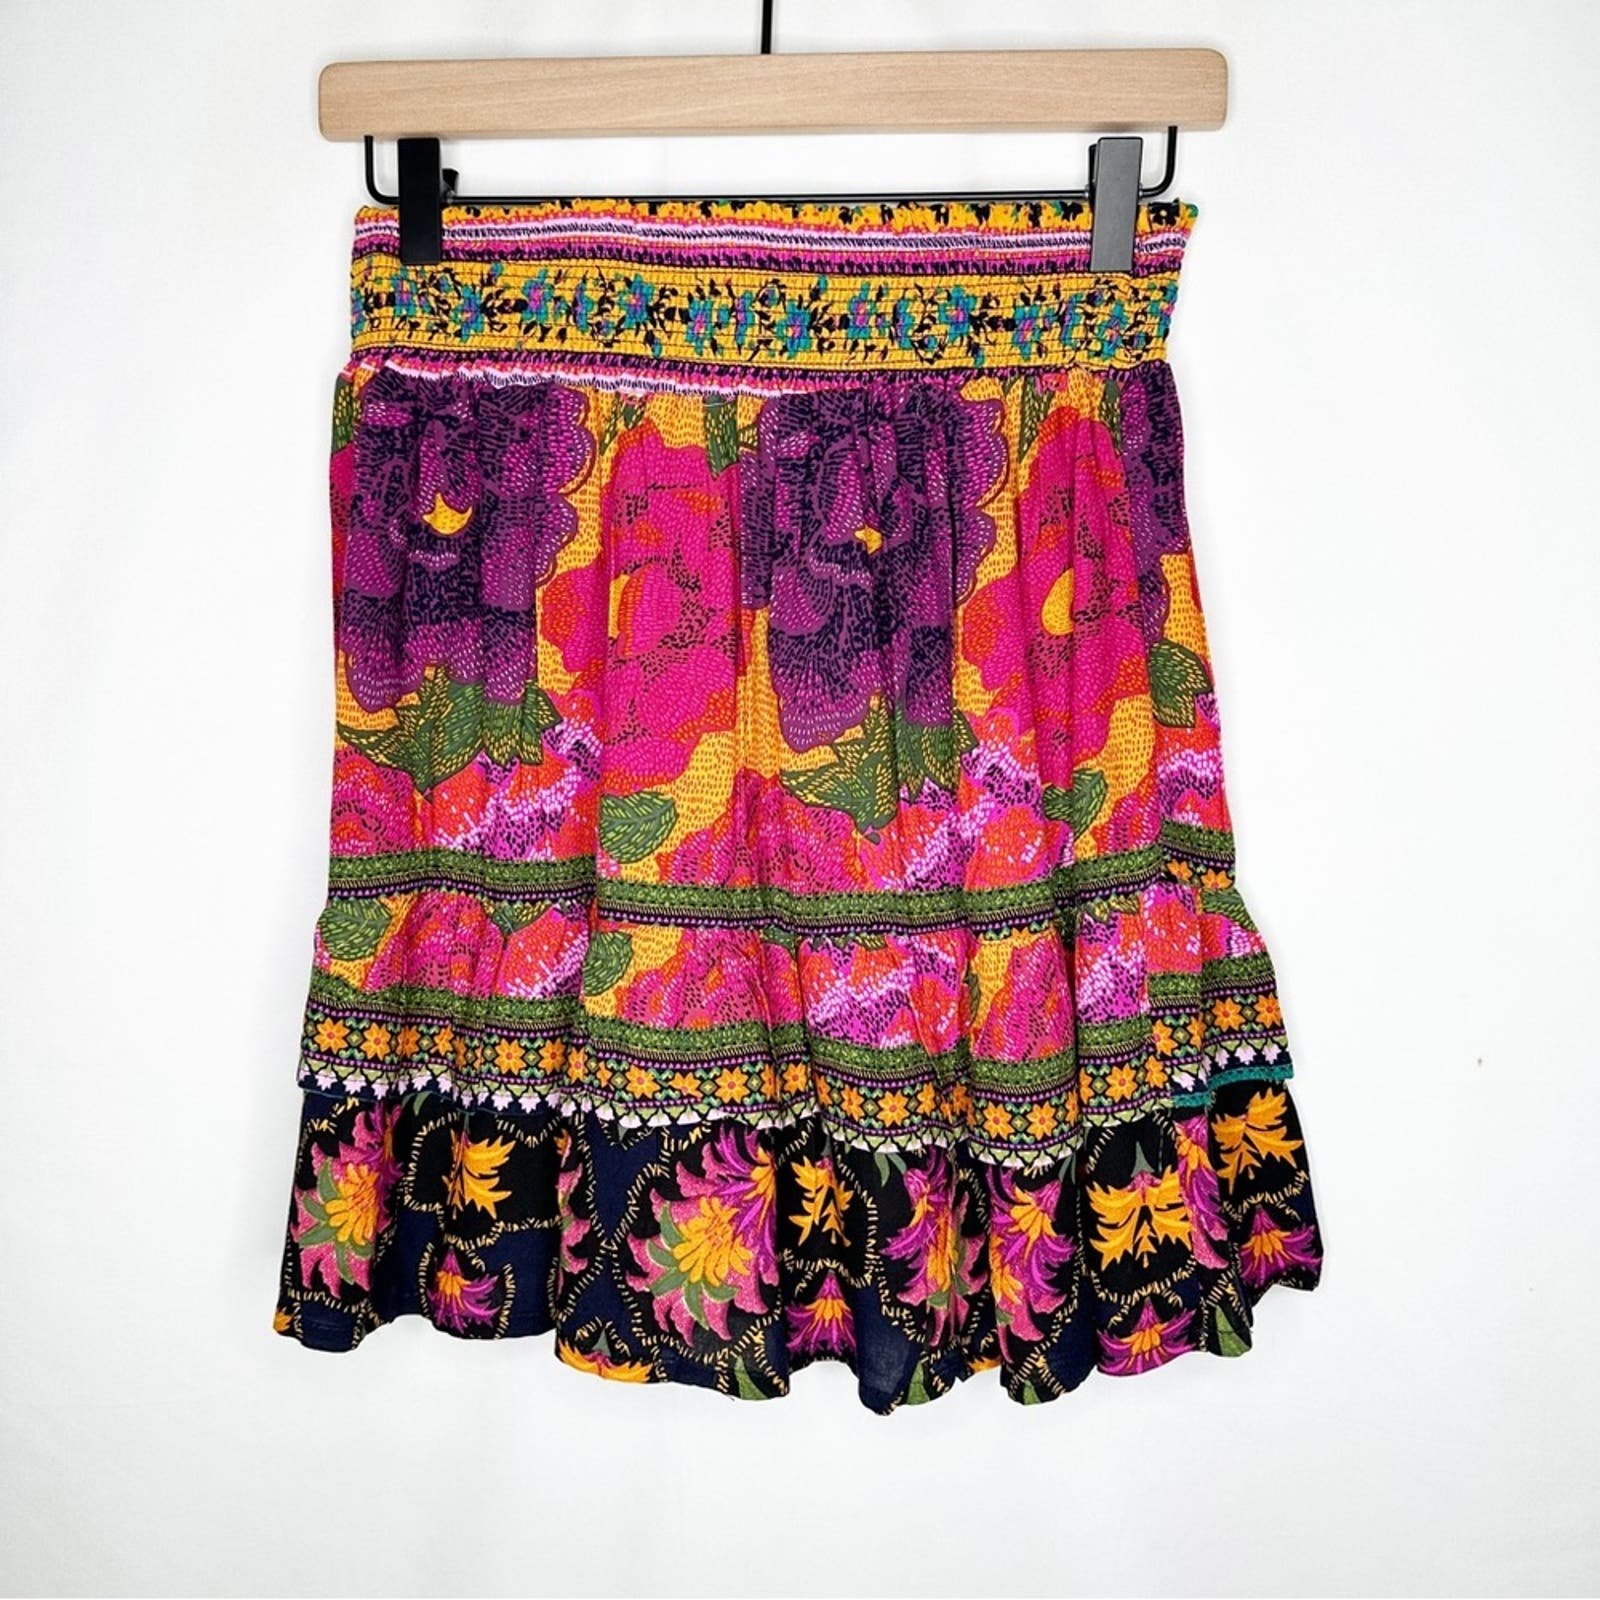 Factory Direct  RACHEL ROY Floral Skirt NWT in Small g7